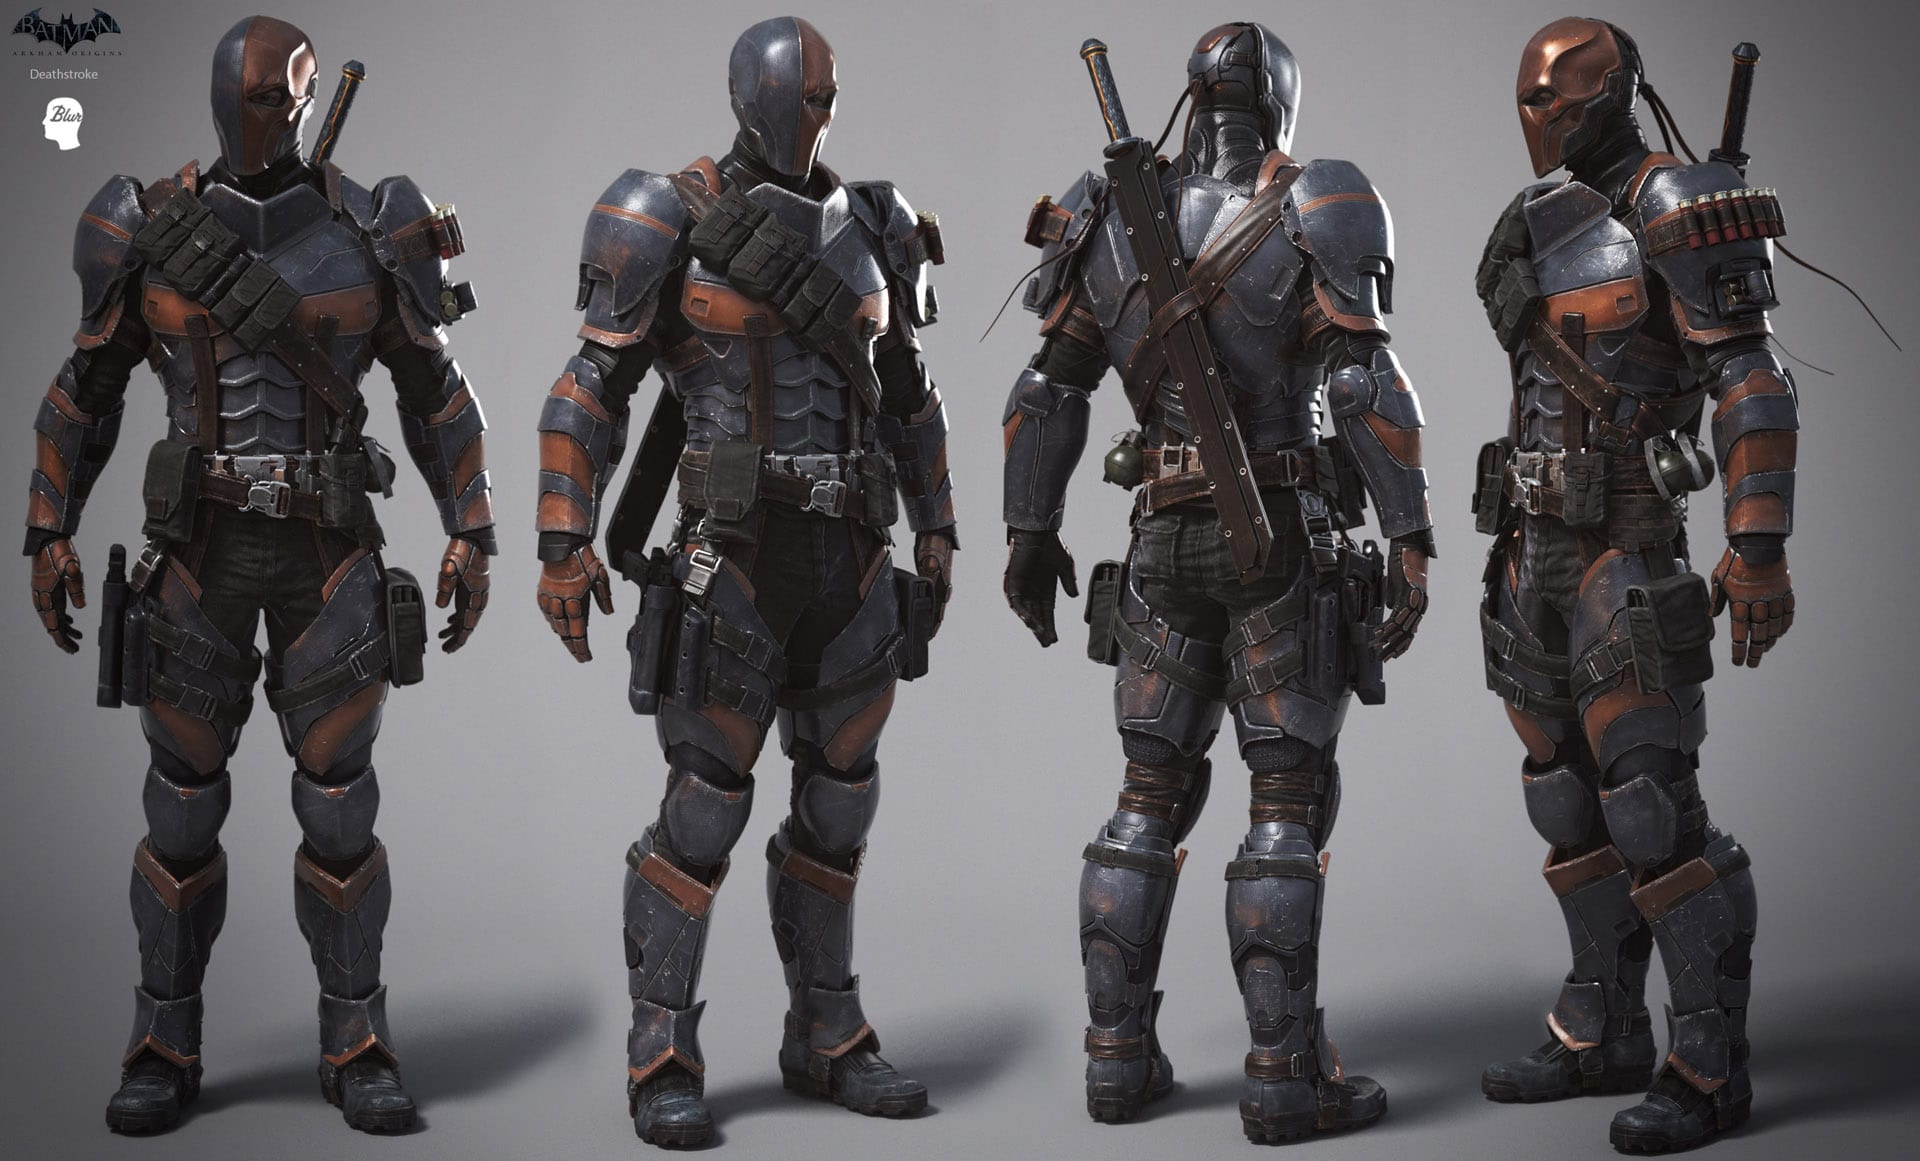 Deathstroke Likely To Be Recast, Standalone Film Not Happening